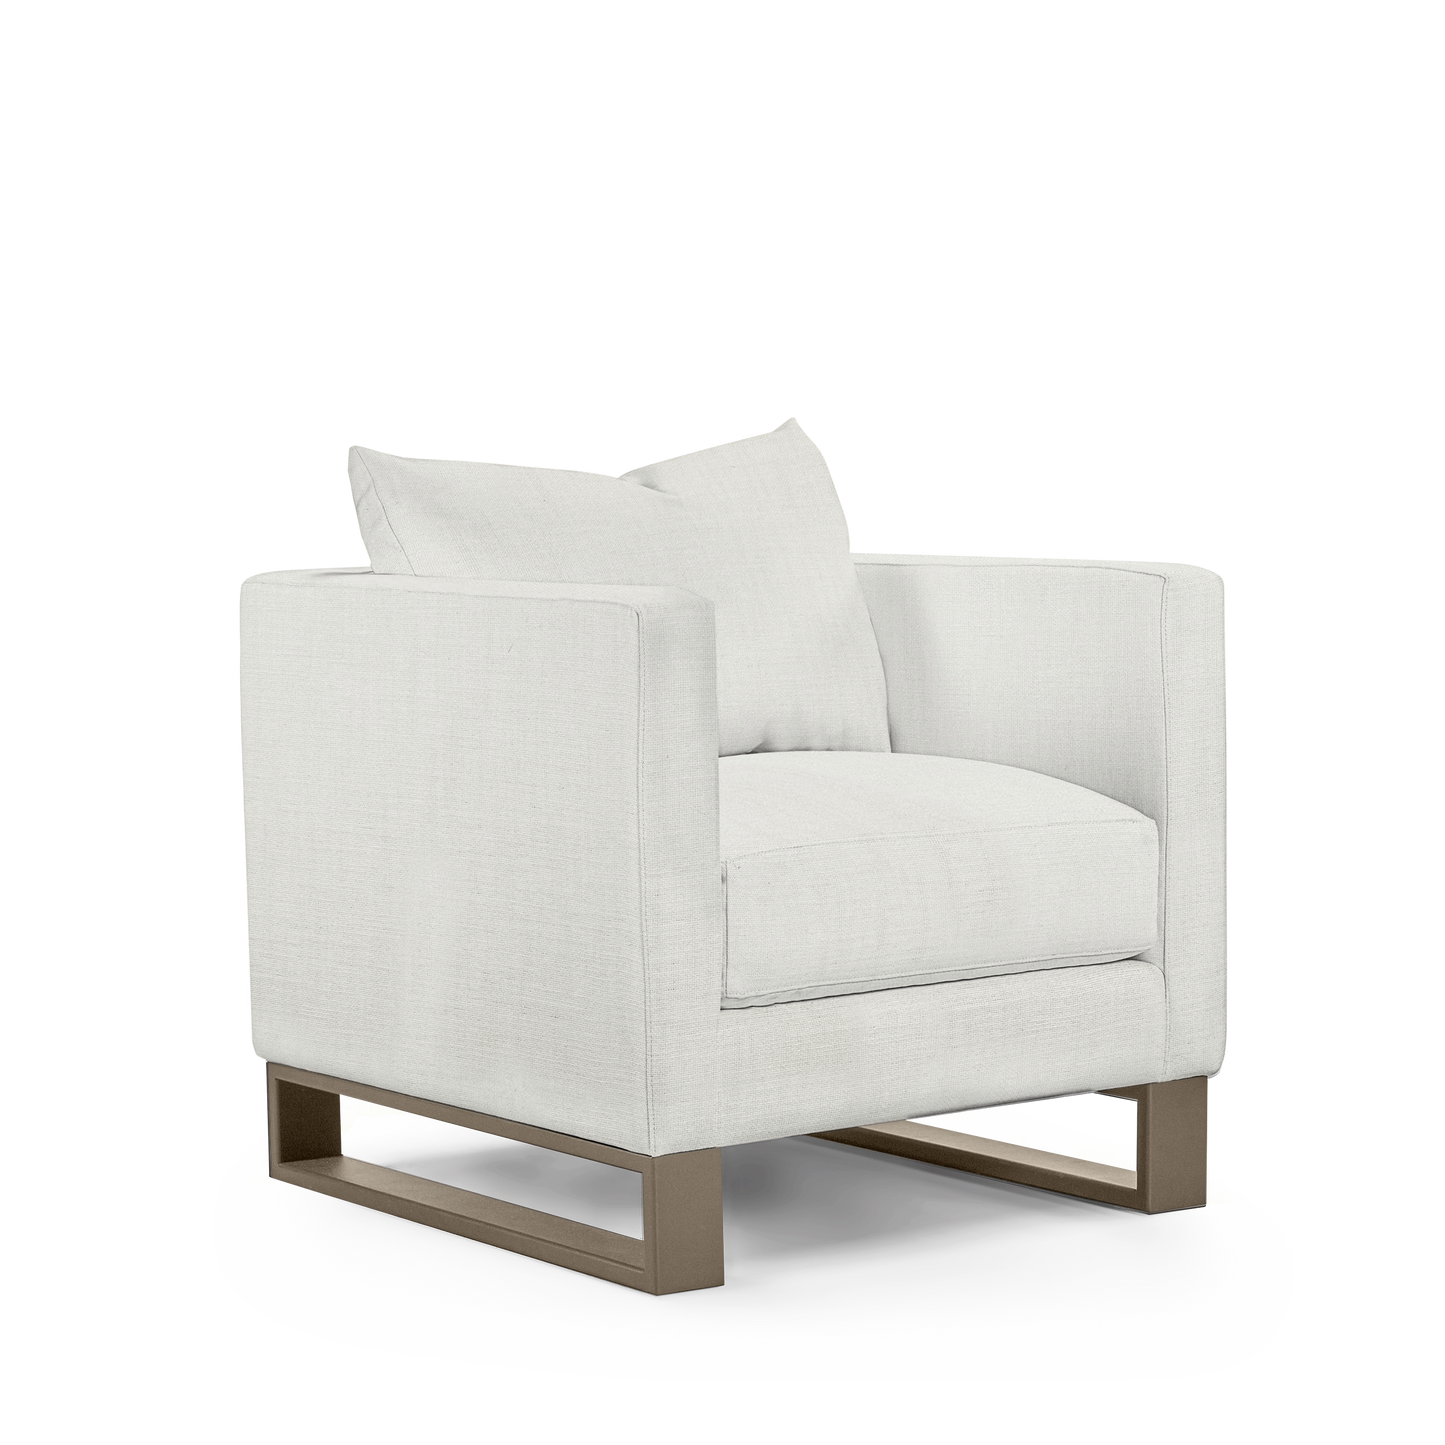 Atlin armchair with Rocco white textile with champagne legs